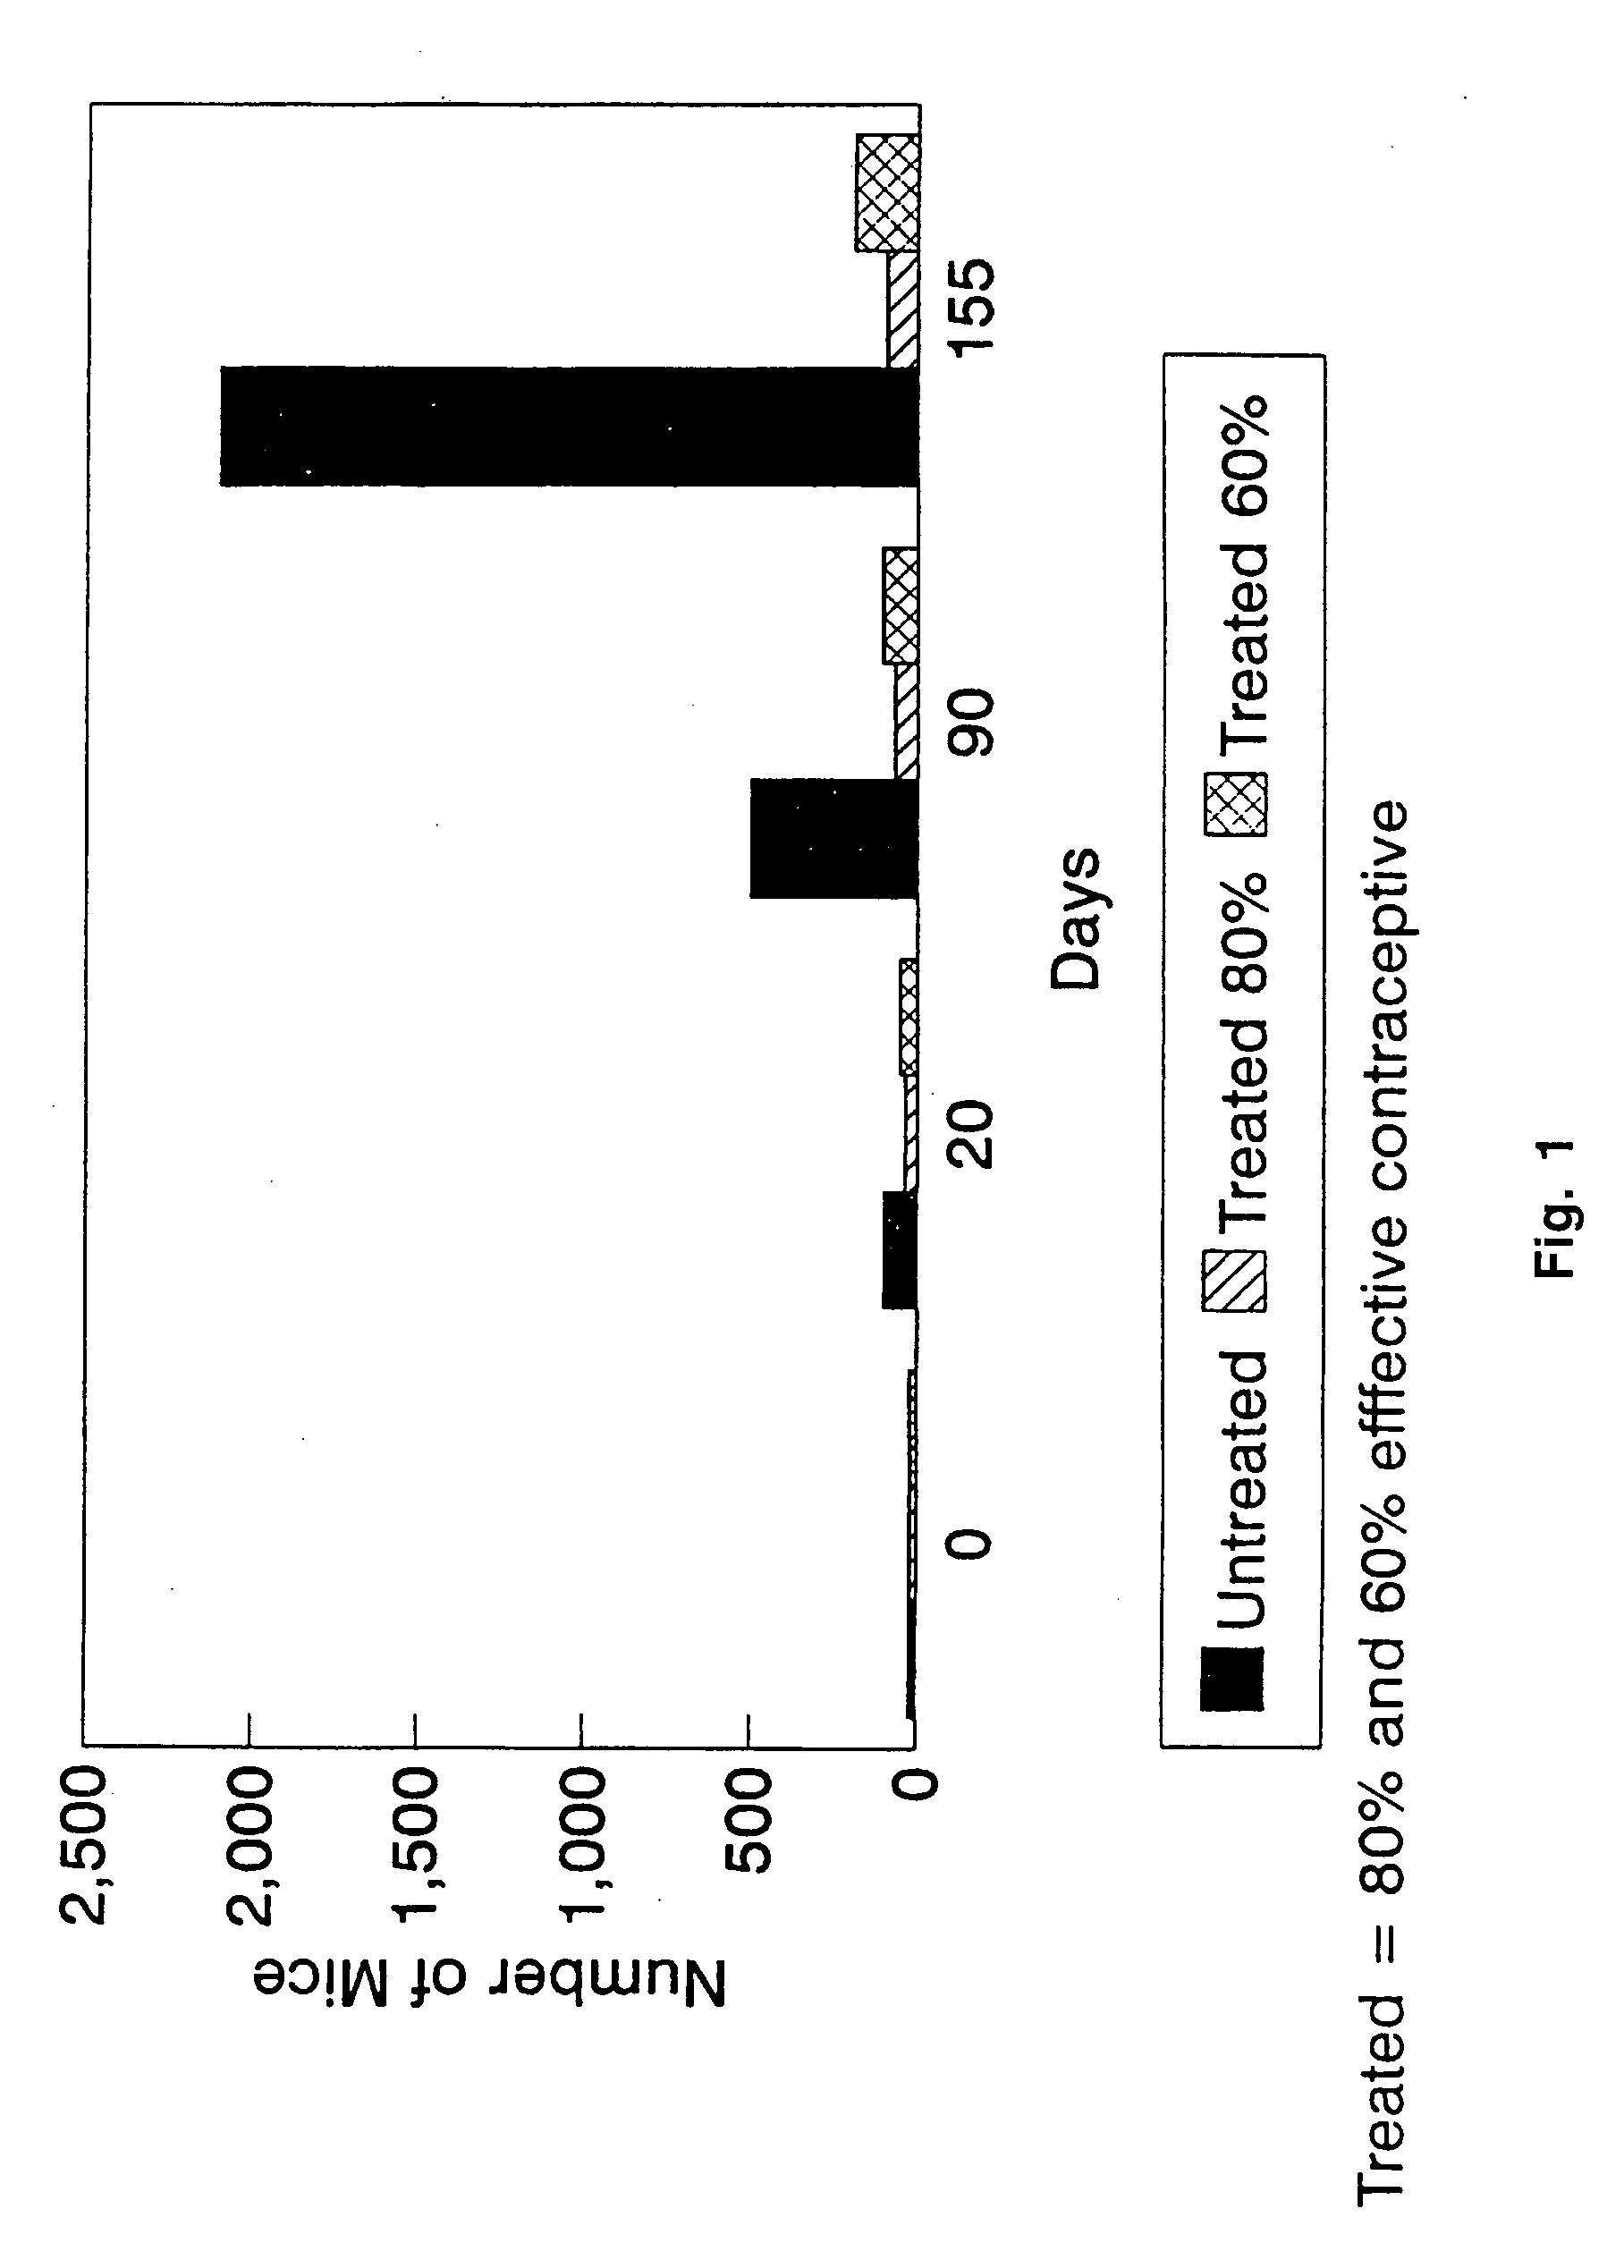 Animal immunocontraceptives expressed in plants and uses thereof